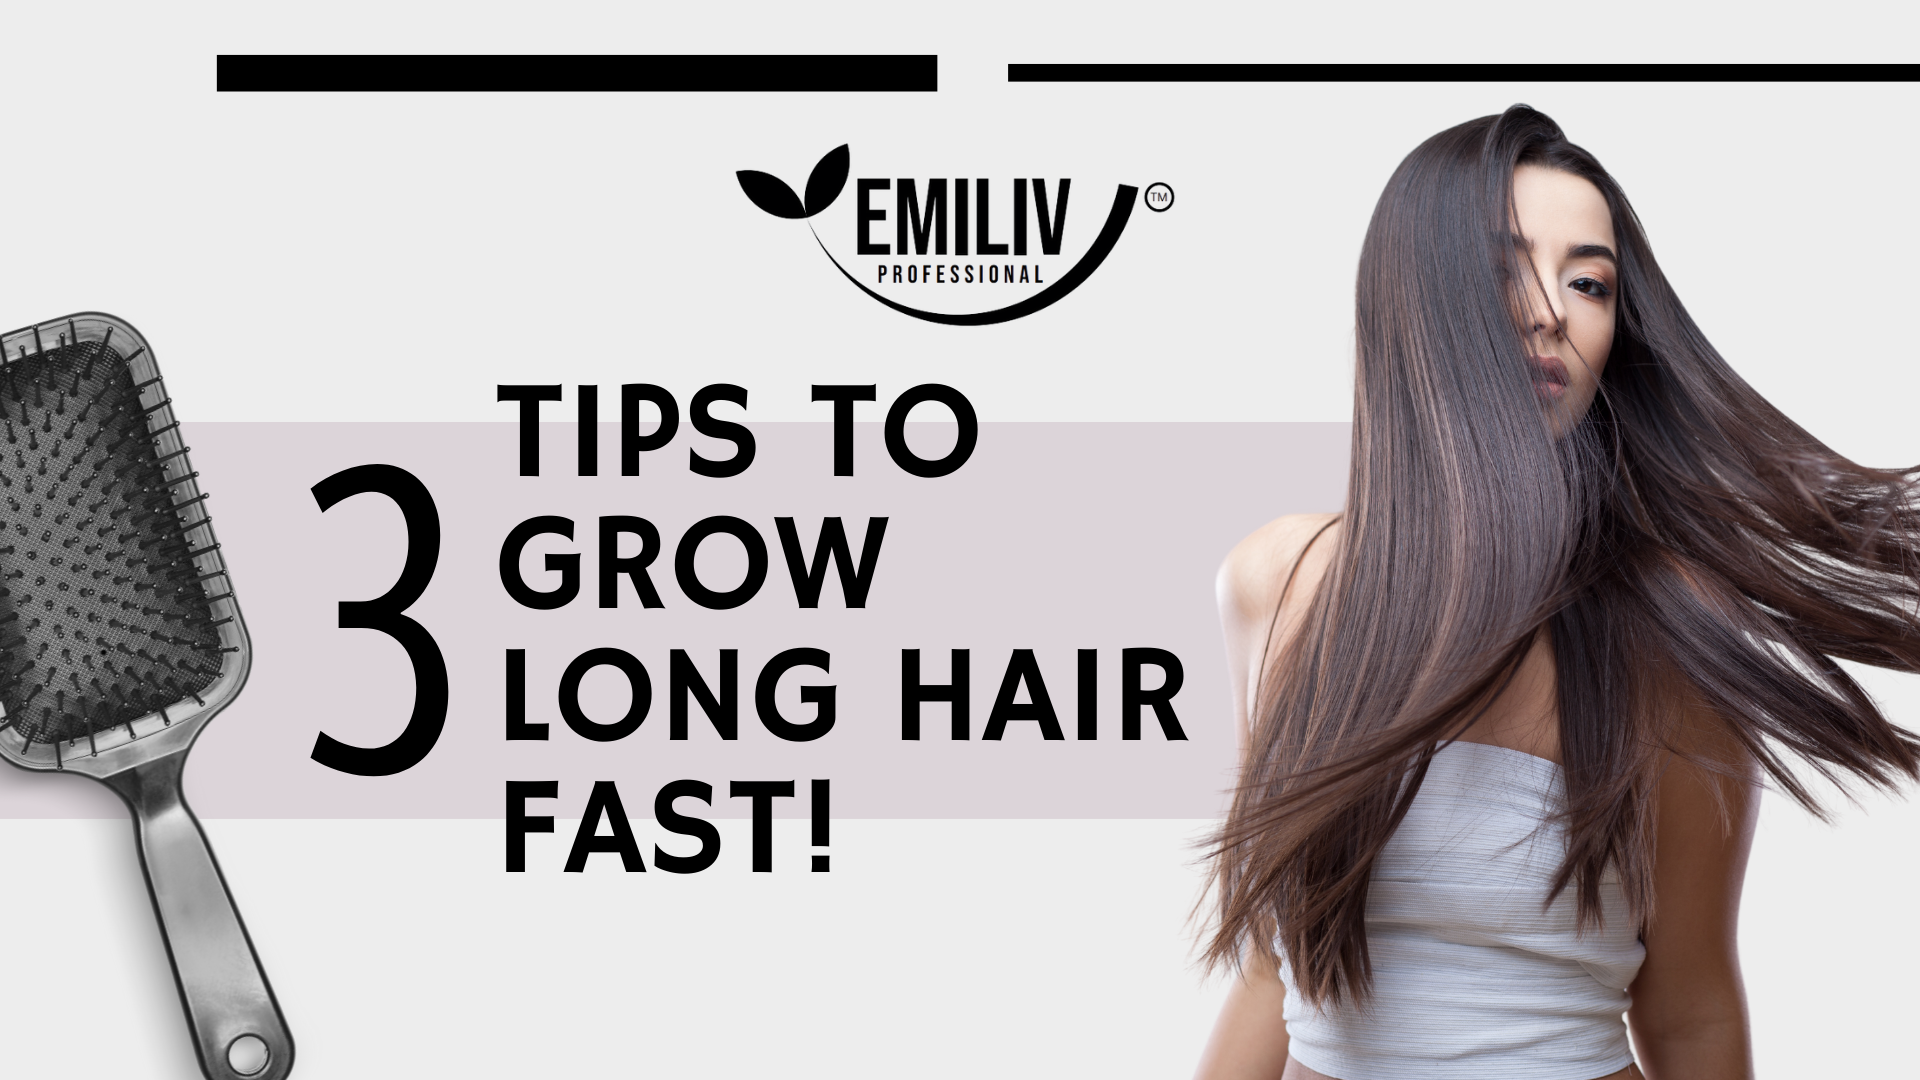 How to Grow Hair Faster - 3 Tips for Growing Longer Hair